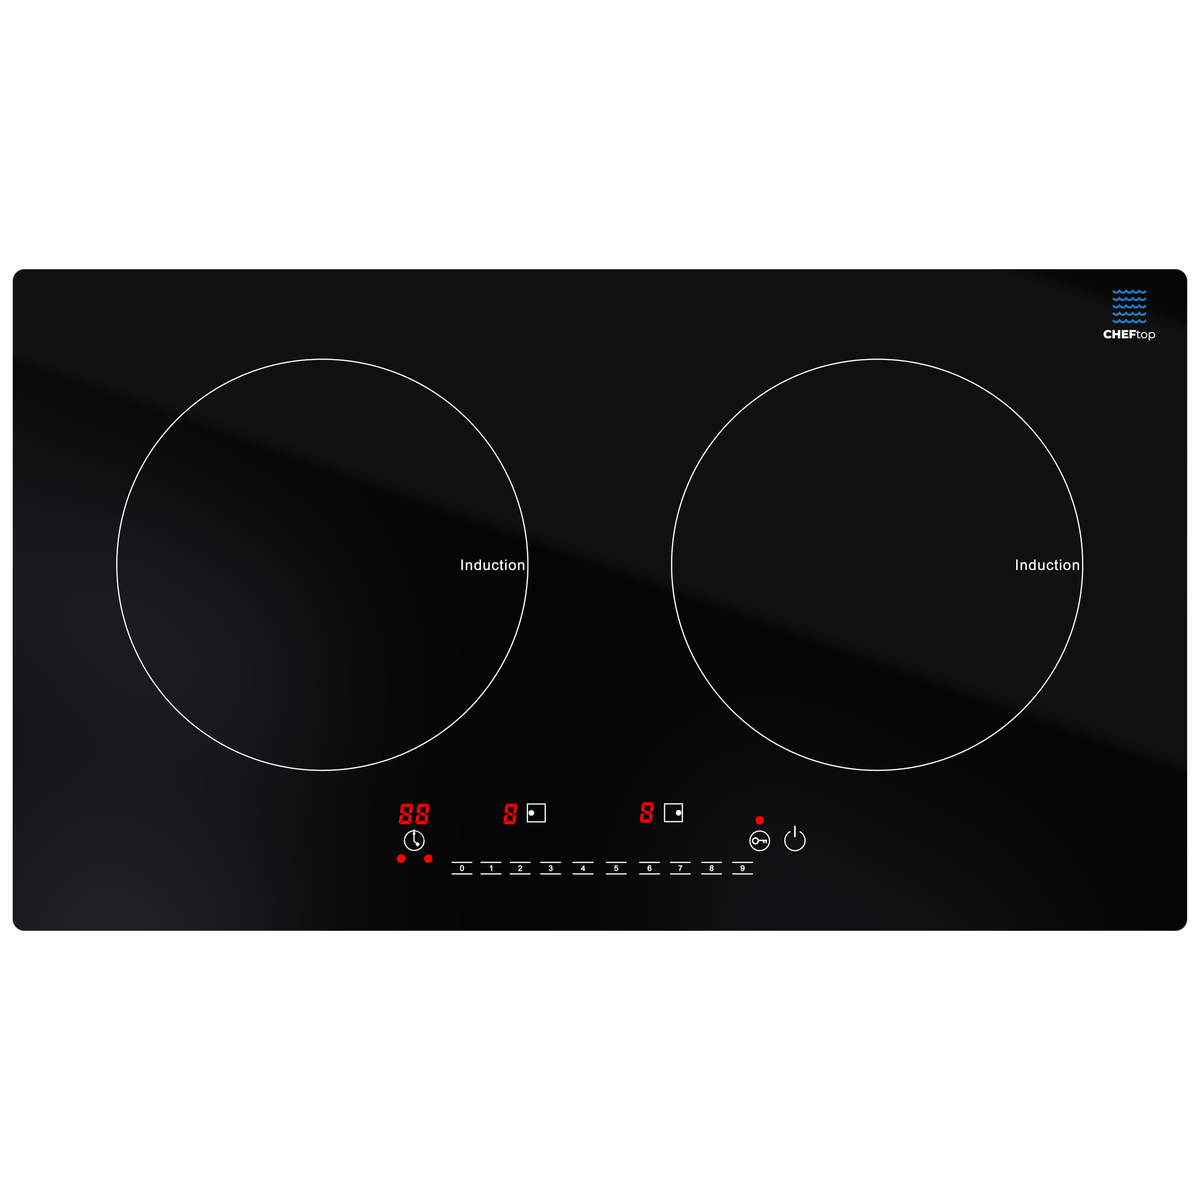 CHEFTop Pro - Dual Burner Induction Cooktop With Optional Induction Pan